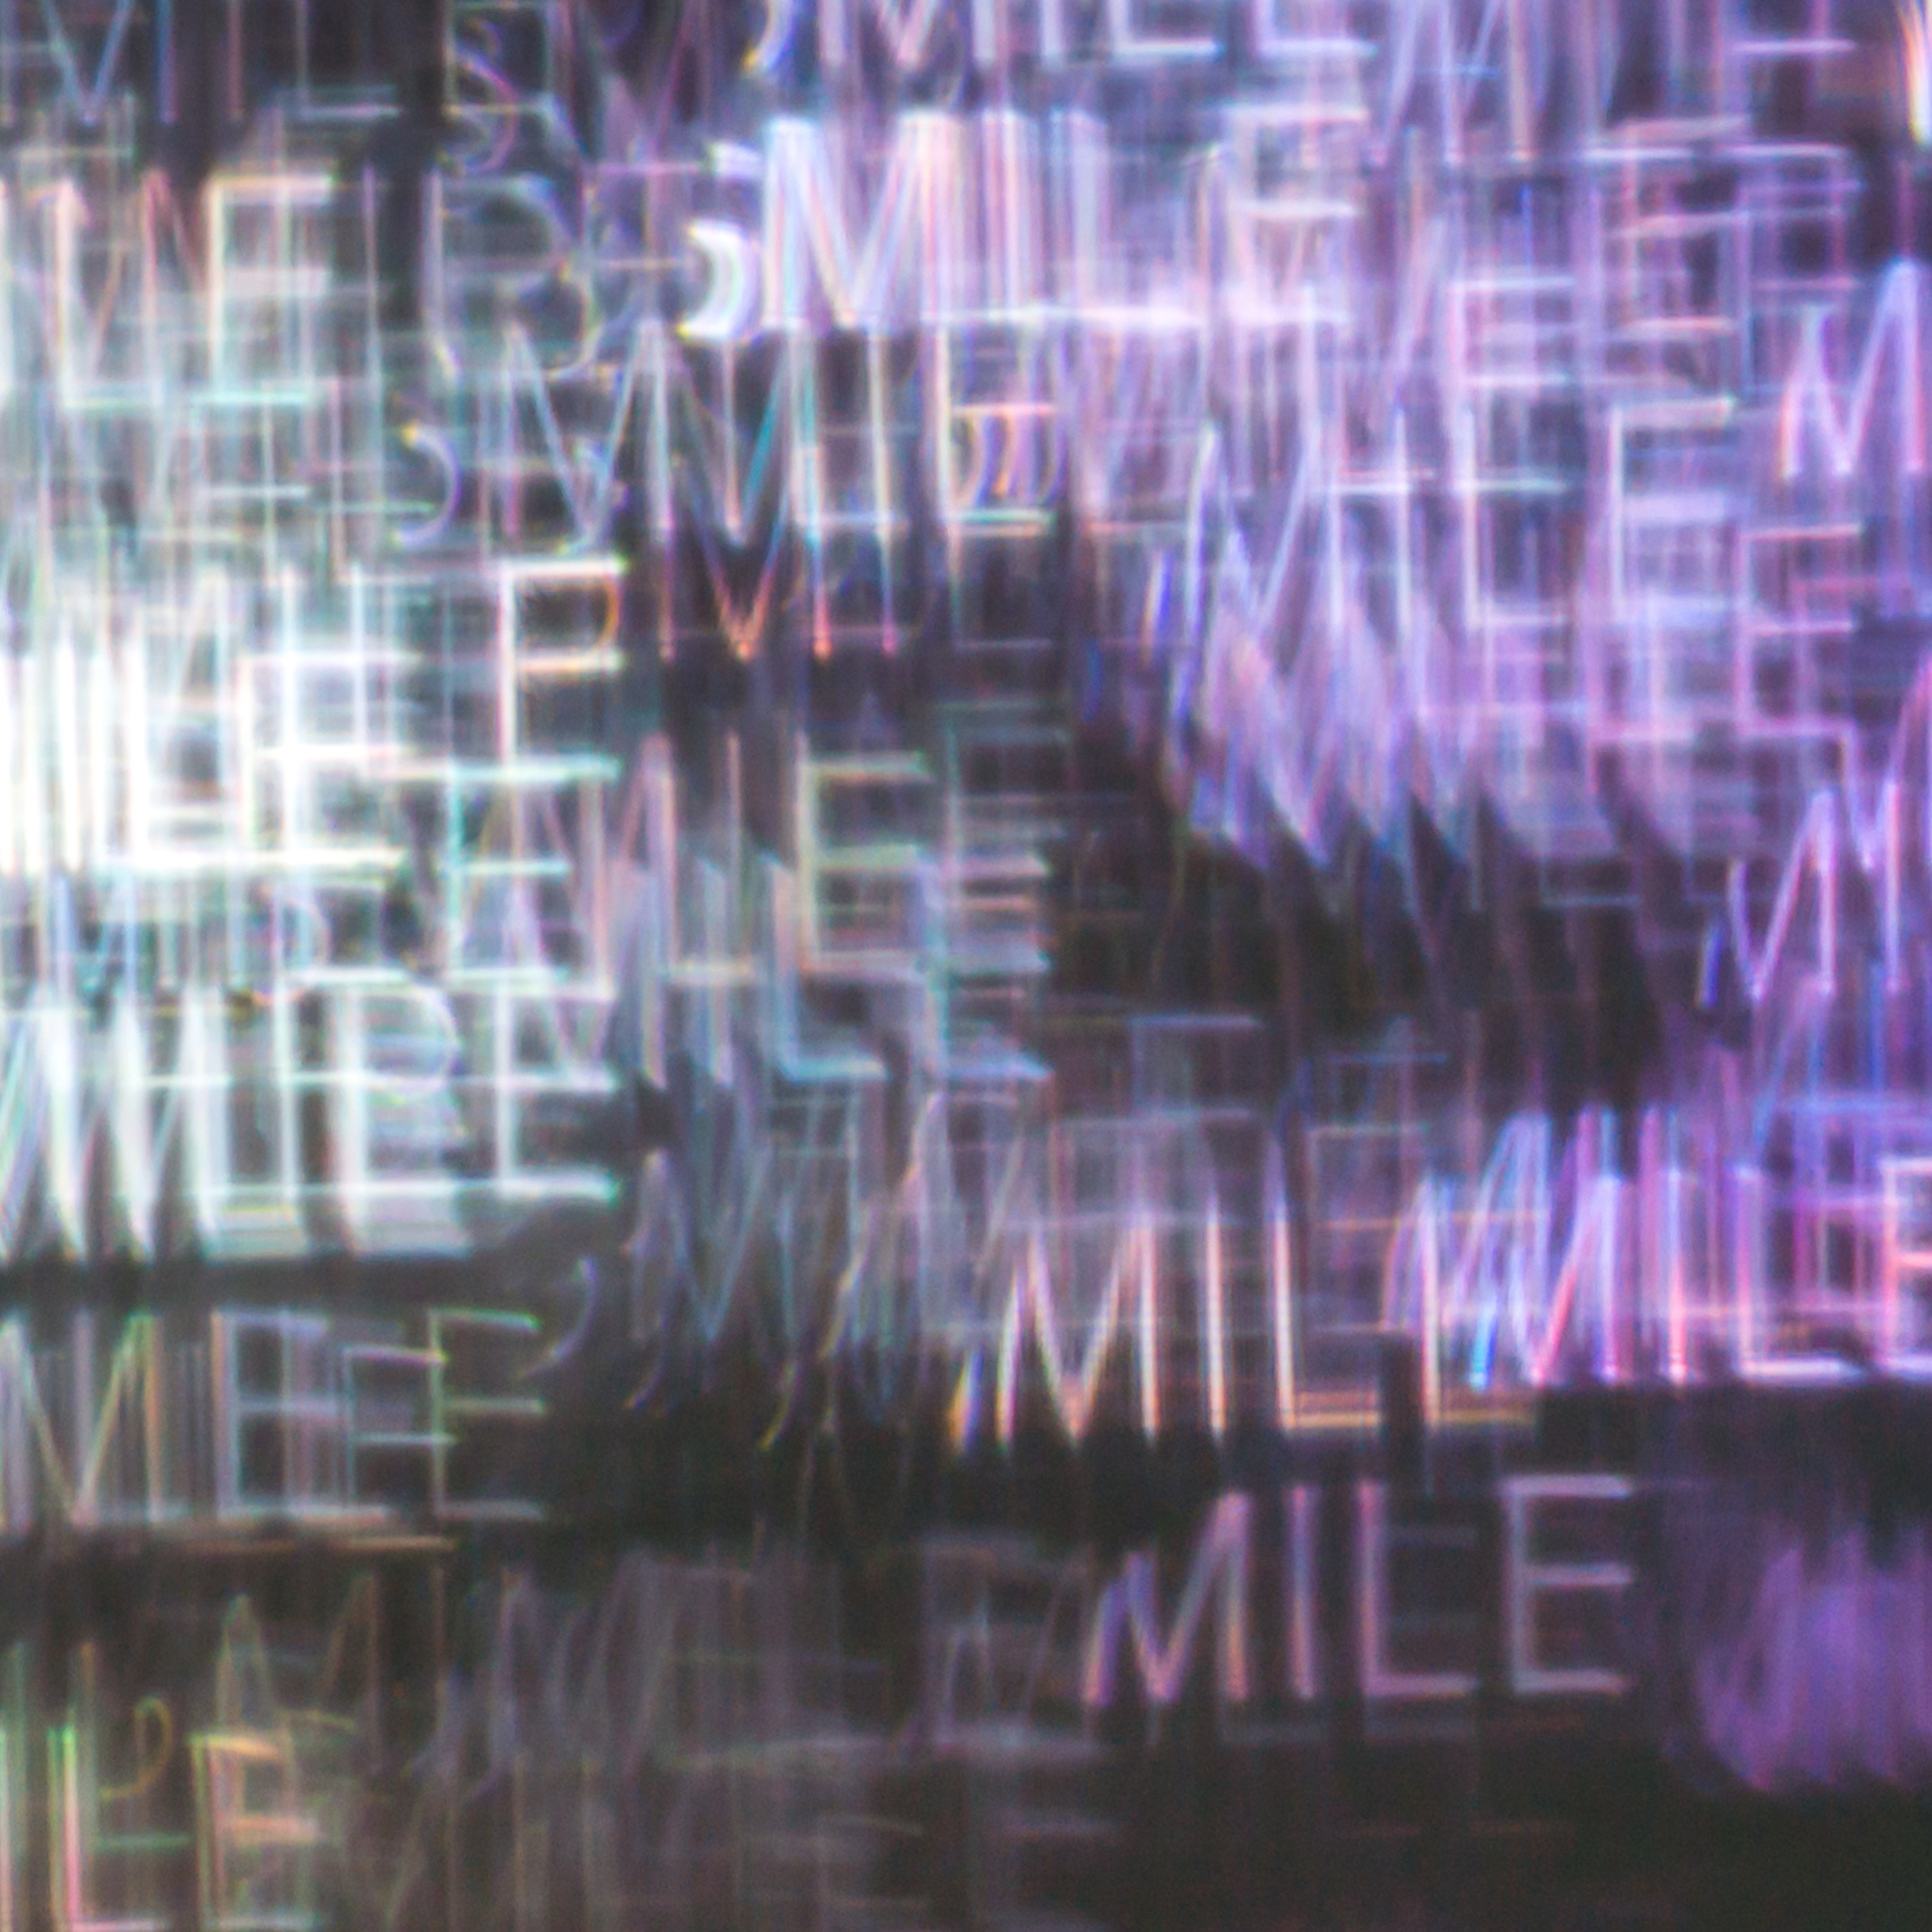 Abstract, blurry overlapping images of the word "smile" in shades of white and purple.